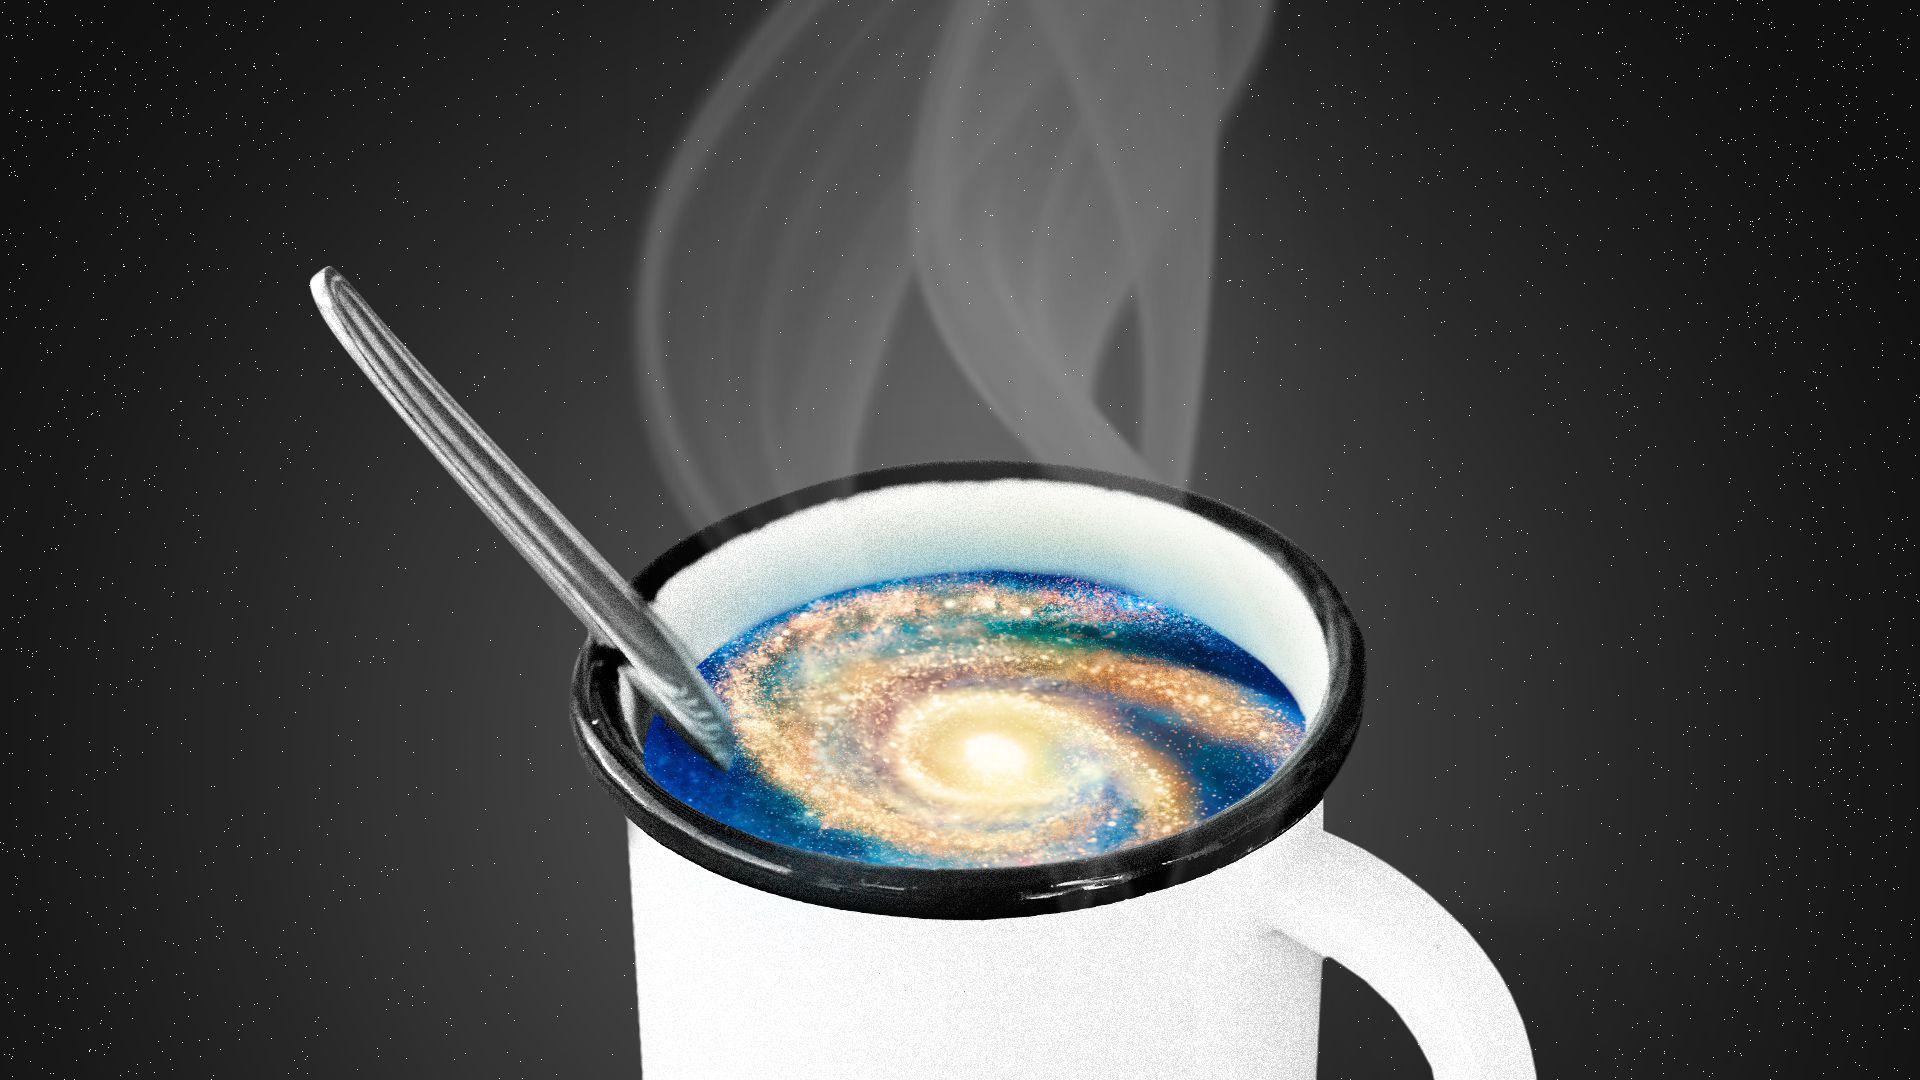 Illustration of the Milky Way in a mug